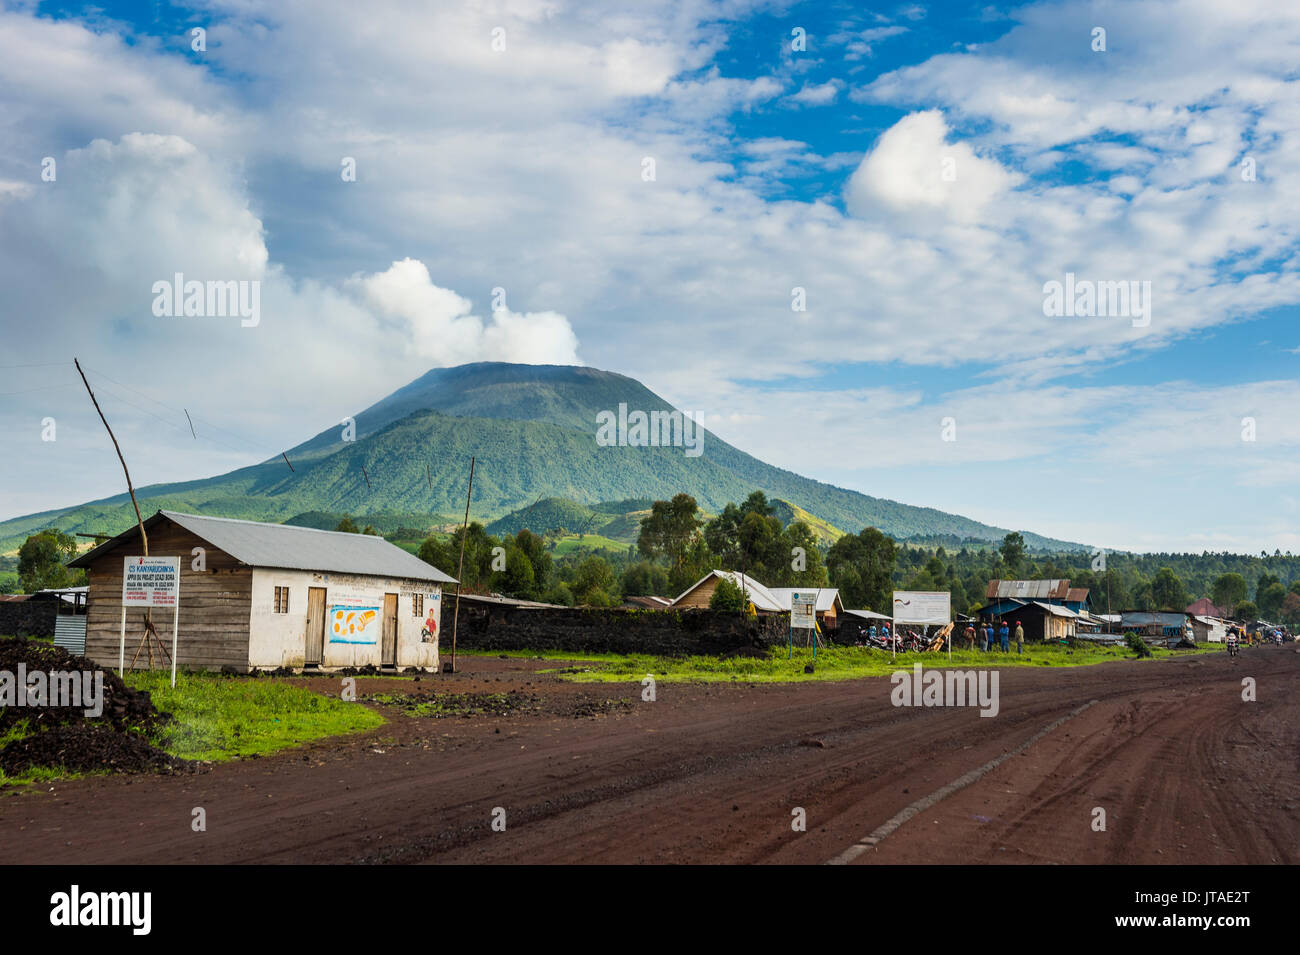 Mount Nyiragongo looming behind the town of Goma, Democratic Republic of the Congo, Africa Stock Photo